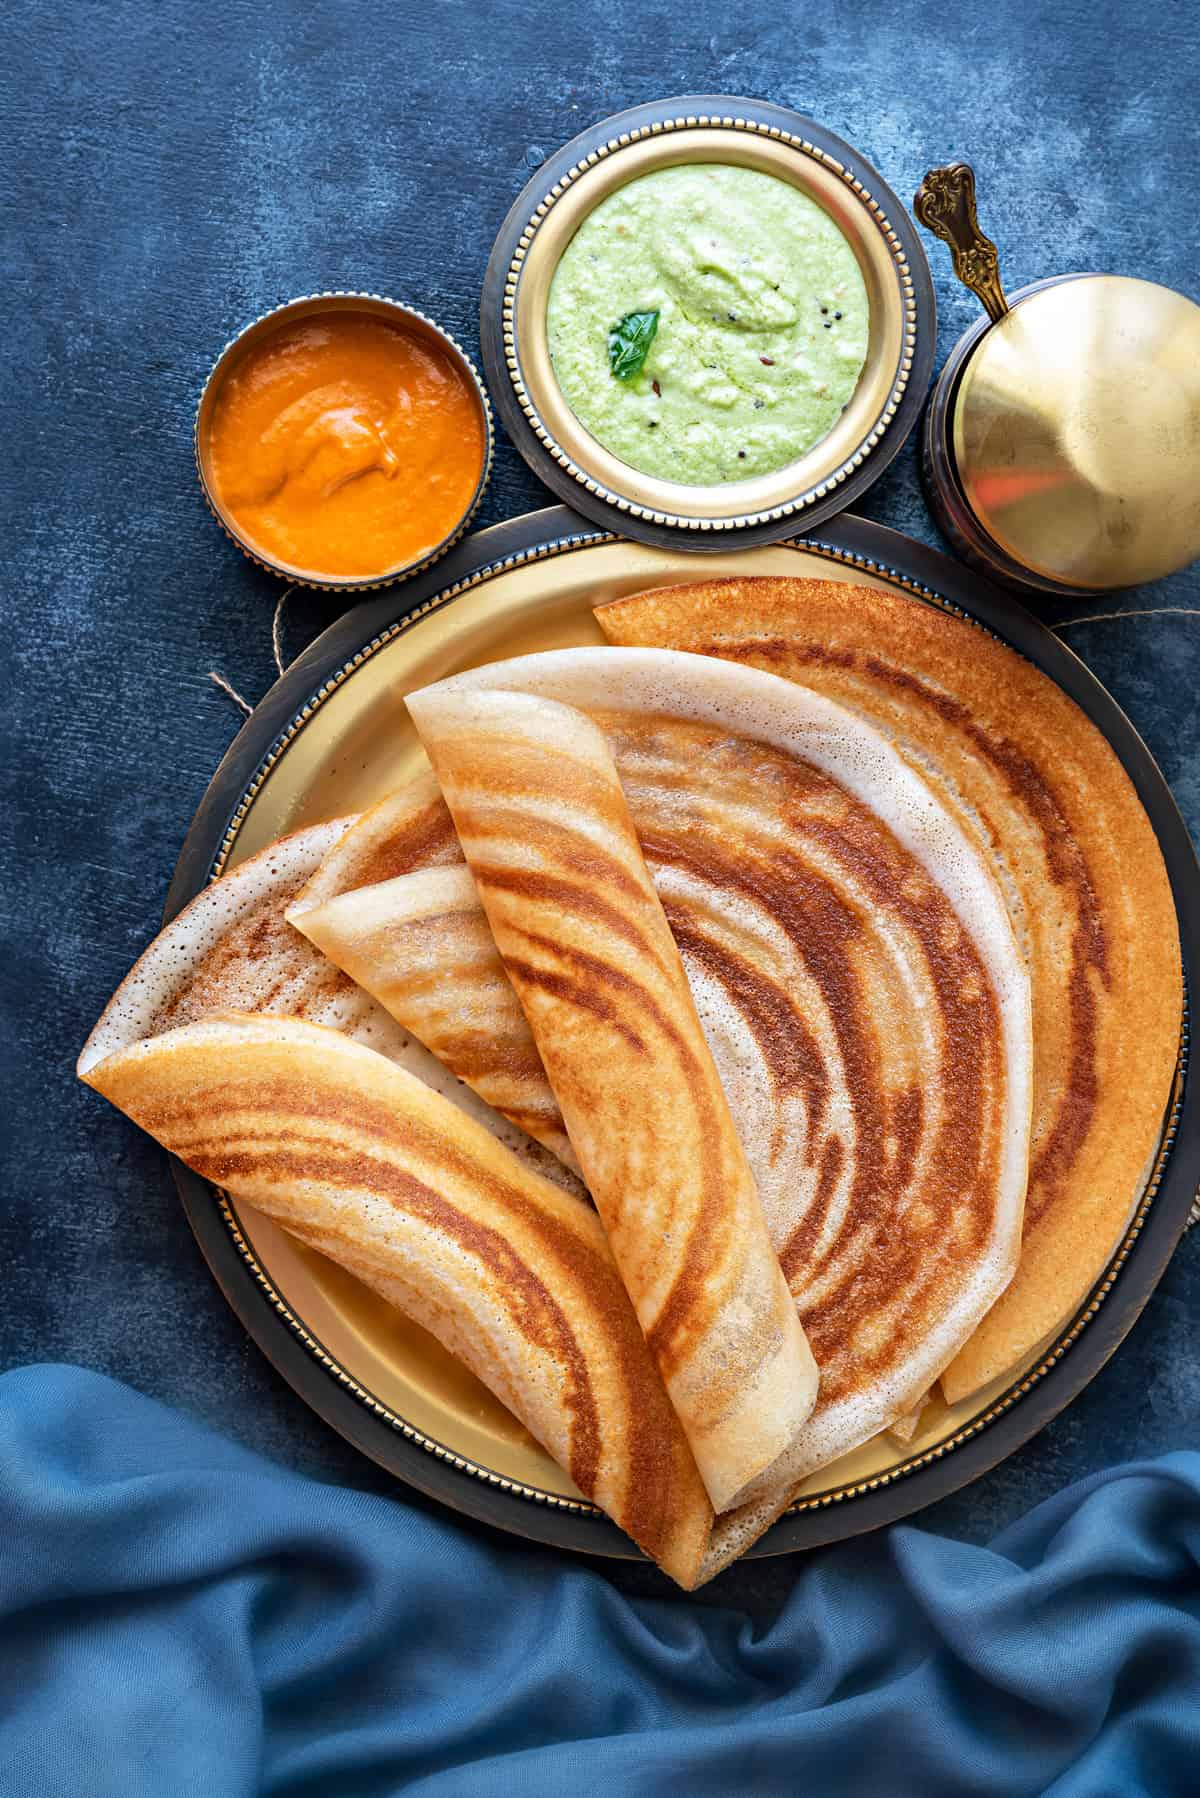 Four plain dosa folded and served on a brass platter with tomato and coconut chutney in bowl on side.